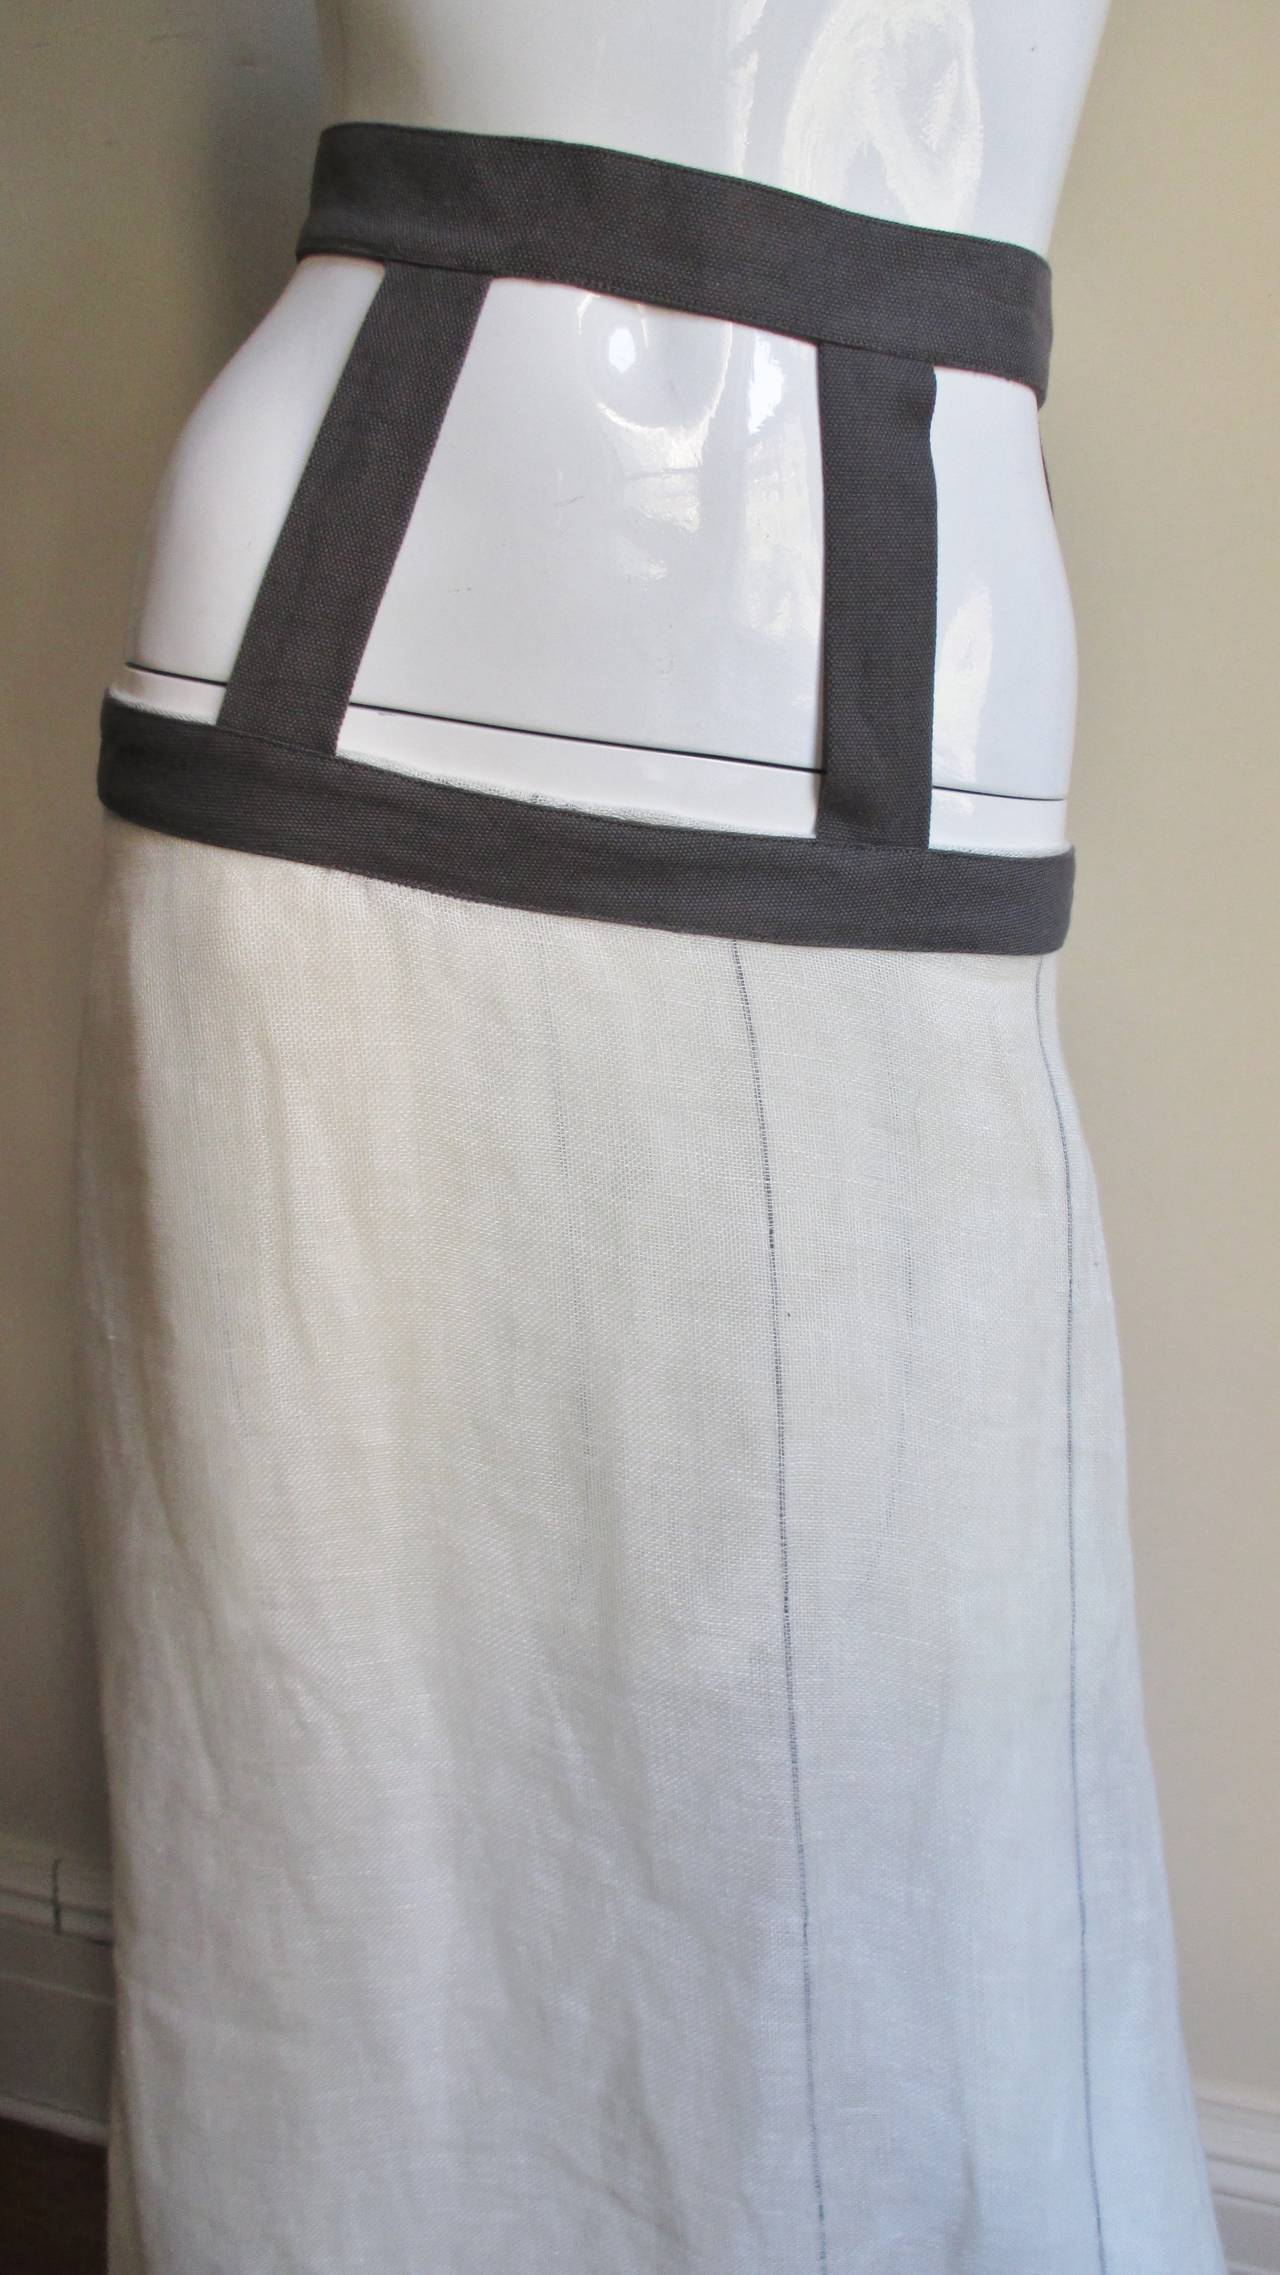 This is an amazing skirt from cutting edge designer Paul Skedd.  It is made of off white linen with intermittent grey vertical stripes matching the skirt's yoke consisting grey linen bands at the waist and hips joined together with 4 vertical bands